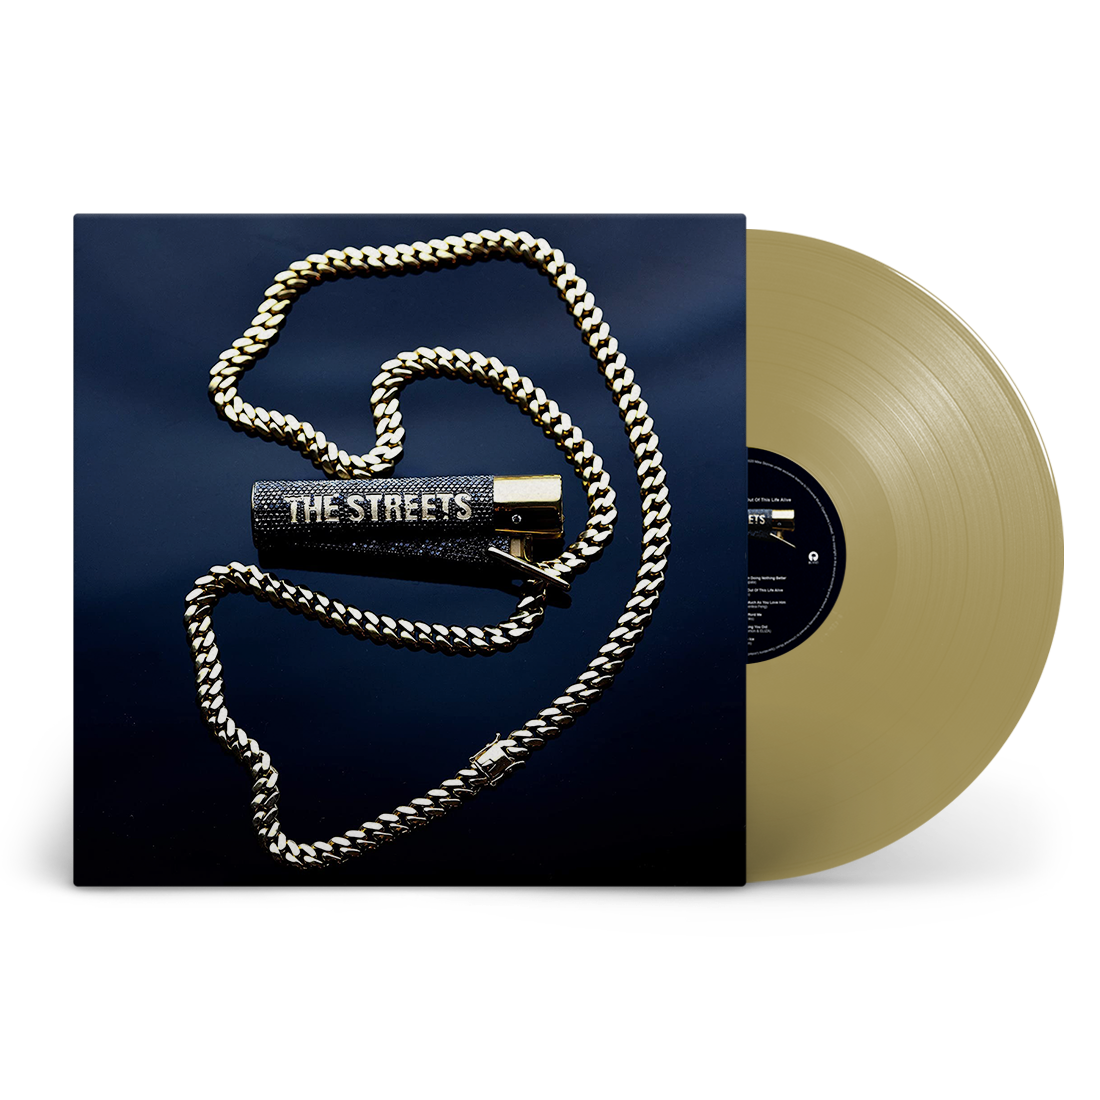 The Streets - None Of Us Are Getting Out Of This Life Alive: Exclusive Limited Gold Vinyl LP